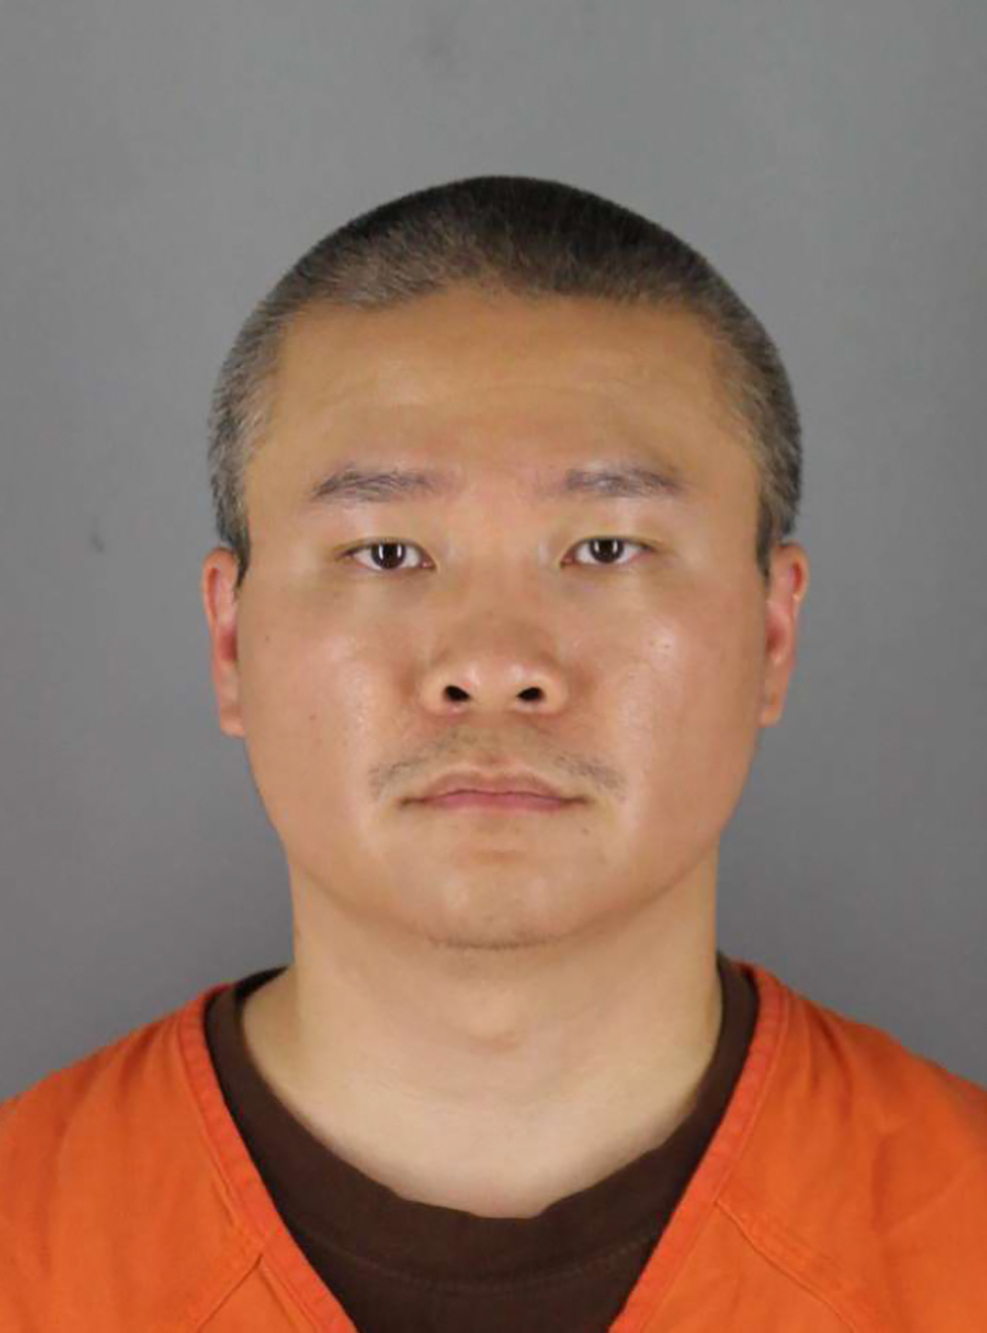 FILE - This photo provided by the Hennepin County Sheriff's Office in Minnesota on June 3, 2020, shows former Minneapolis Police Officer Tou Thao. U.S. District Judge Paul Magnuson handed J. Alexander Kueng and Thao a victory when he ruled that the complex formulas for calculating their sentences will use the crime of involuntary manslaughter, rather than murder, as a starting point. Magnuson will sentence the men in back-to-back hearings Wednesday, July 27, 2022, after they were convicted of violating George Floyd's civil rights when Officer Derek Chauvin pressed his knee into Floyd's neck for 9 1/2 minutes as the 46-year-old Black man was handcuffed and facedown on the street on May 25, 2020. (Hennepin County Sheriff's Office via AP, File)